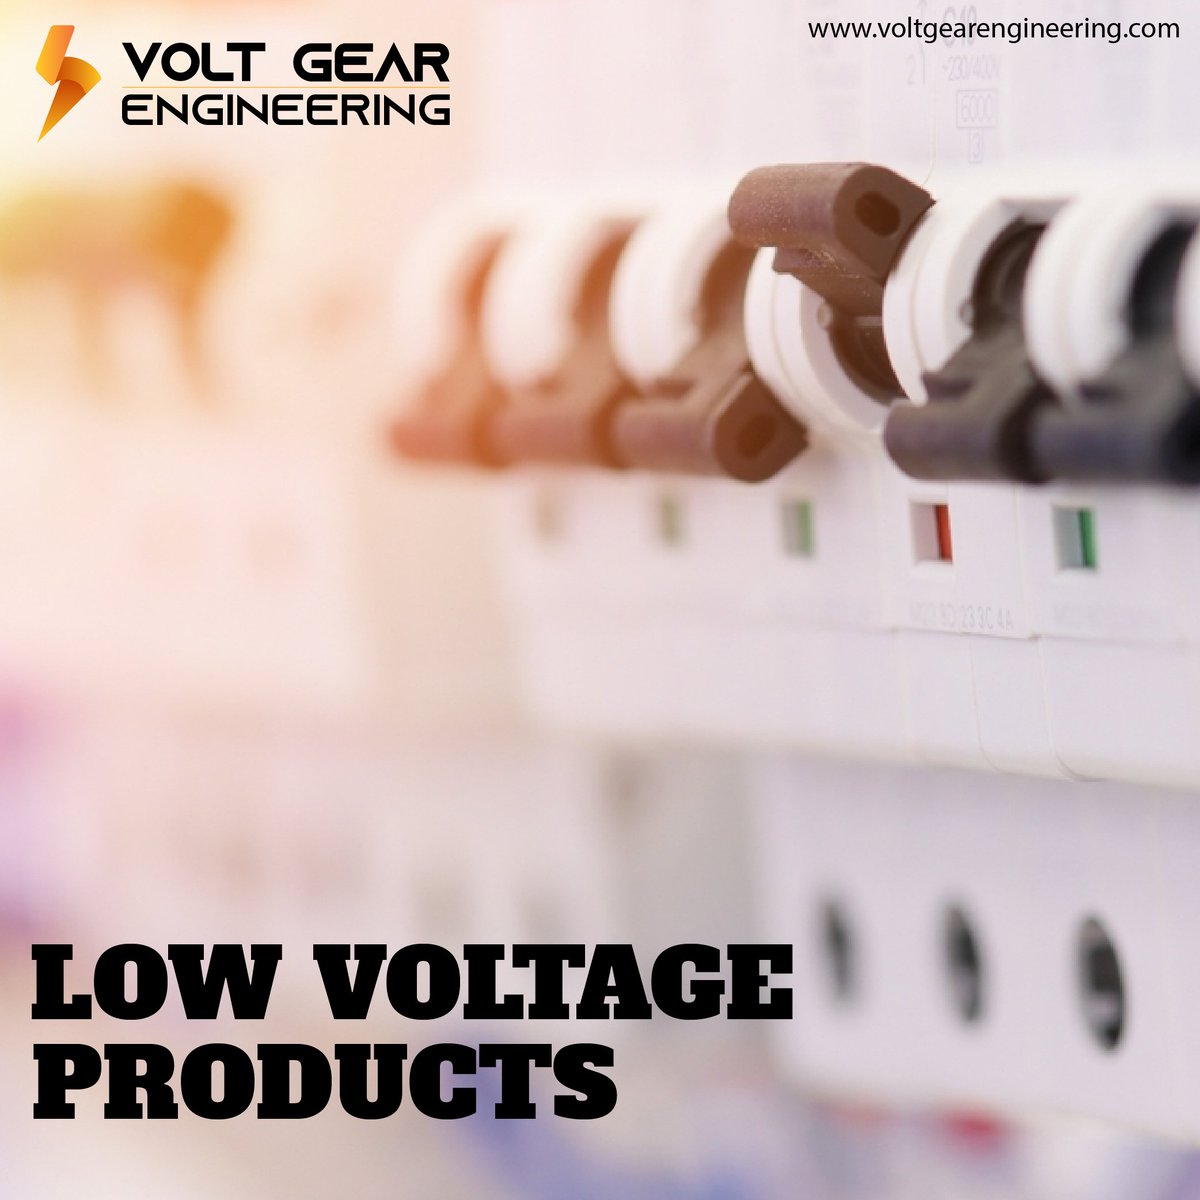 Powering up your world, one volt at a time ⚡ Our low voltage services ensure maximum efficiency and safety for your electrical needs.
.
.
#lowvoltage #voltgearengineering #electricalsafety